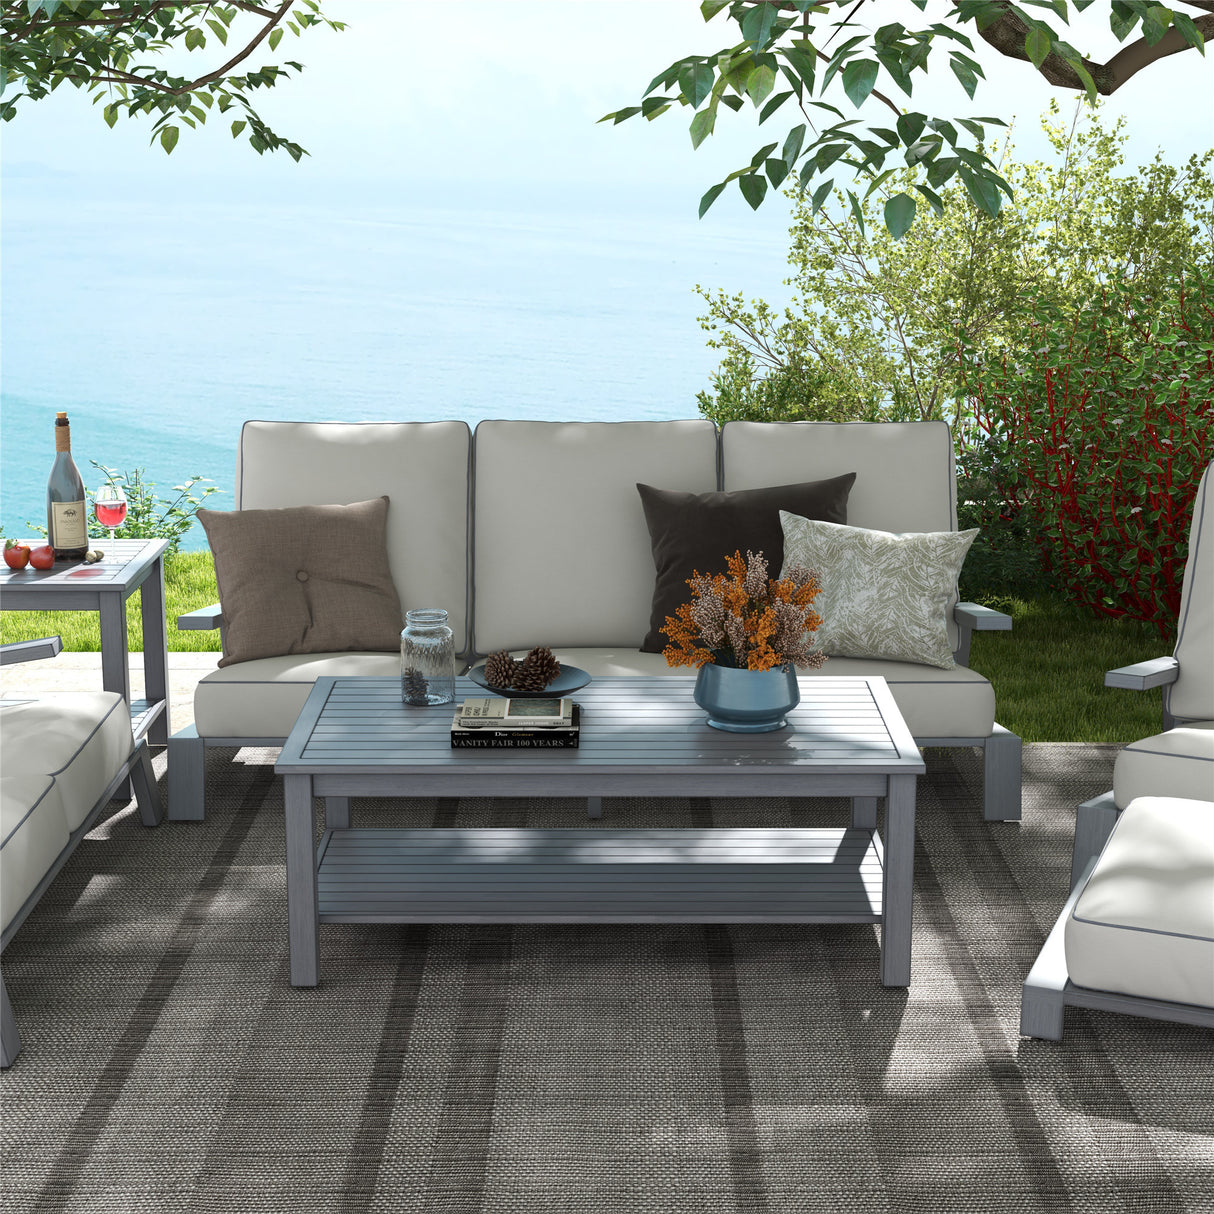 Octavia All-Weather Outdoor, Patio 6-Piece Aluminum Deep Seating Set with Water-Repellent Cushions for Deck, Backyards, Garden, Lawns, Poolside, and Beach.